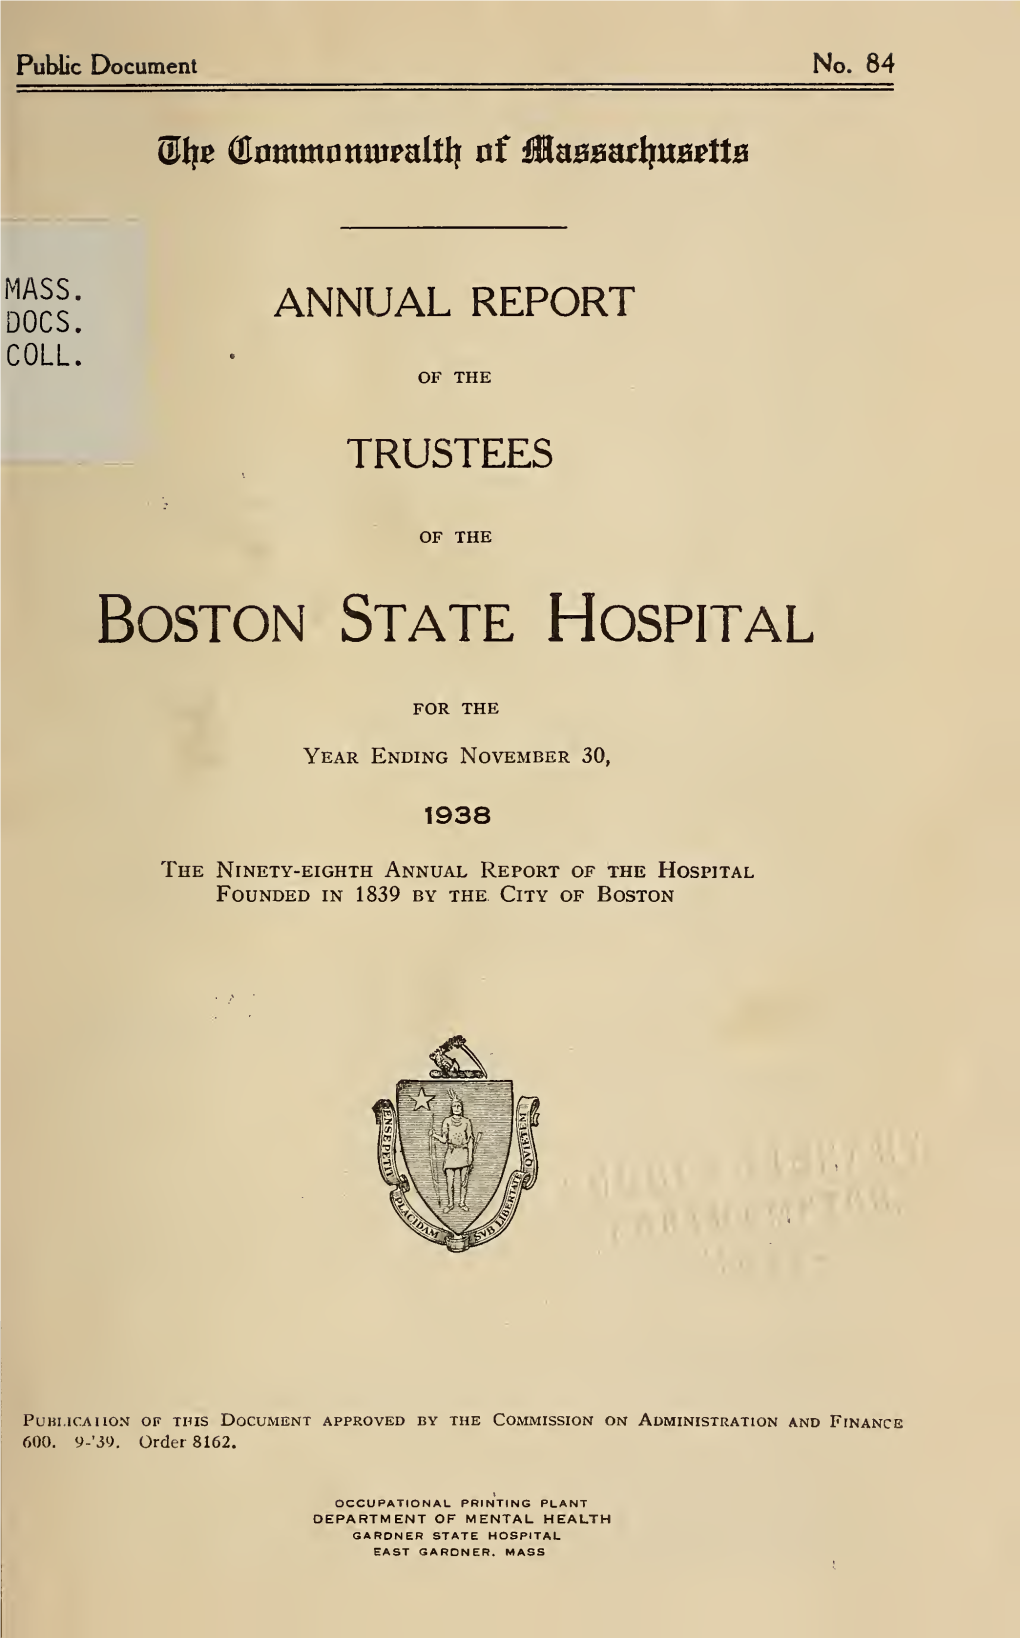 Annual Report of the Trustees of the Boston State Hospital, For